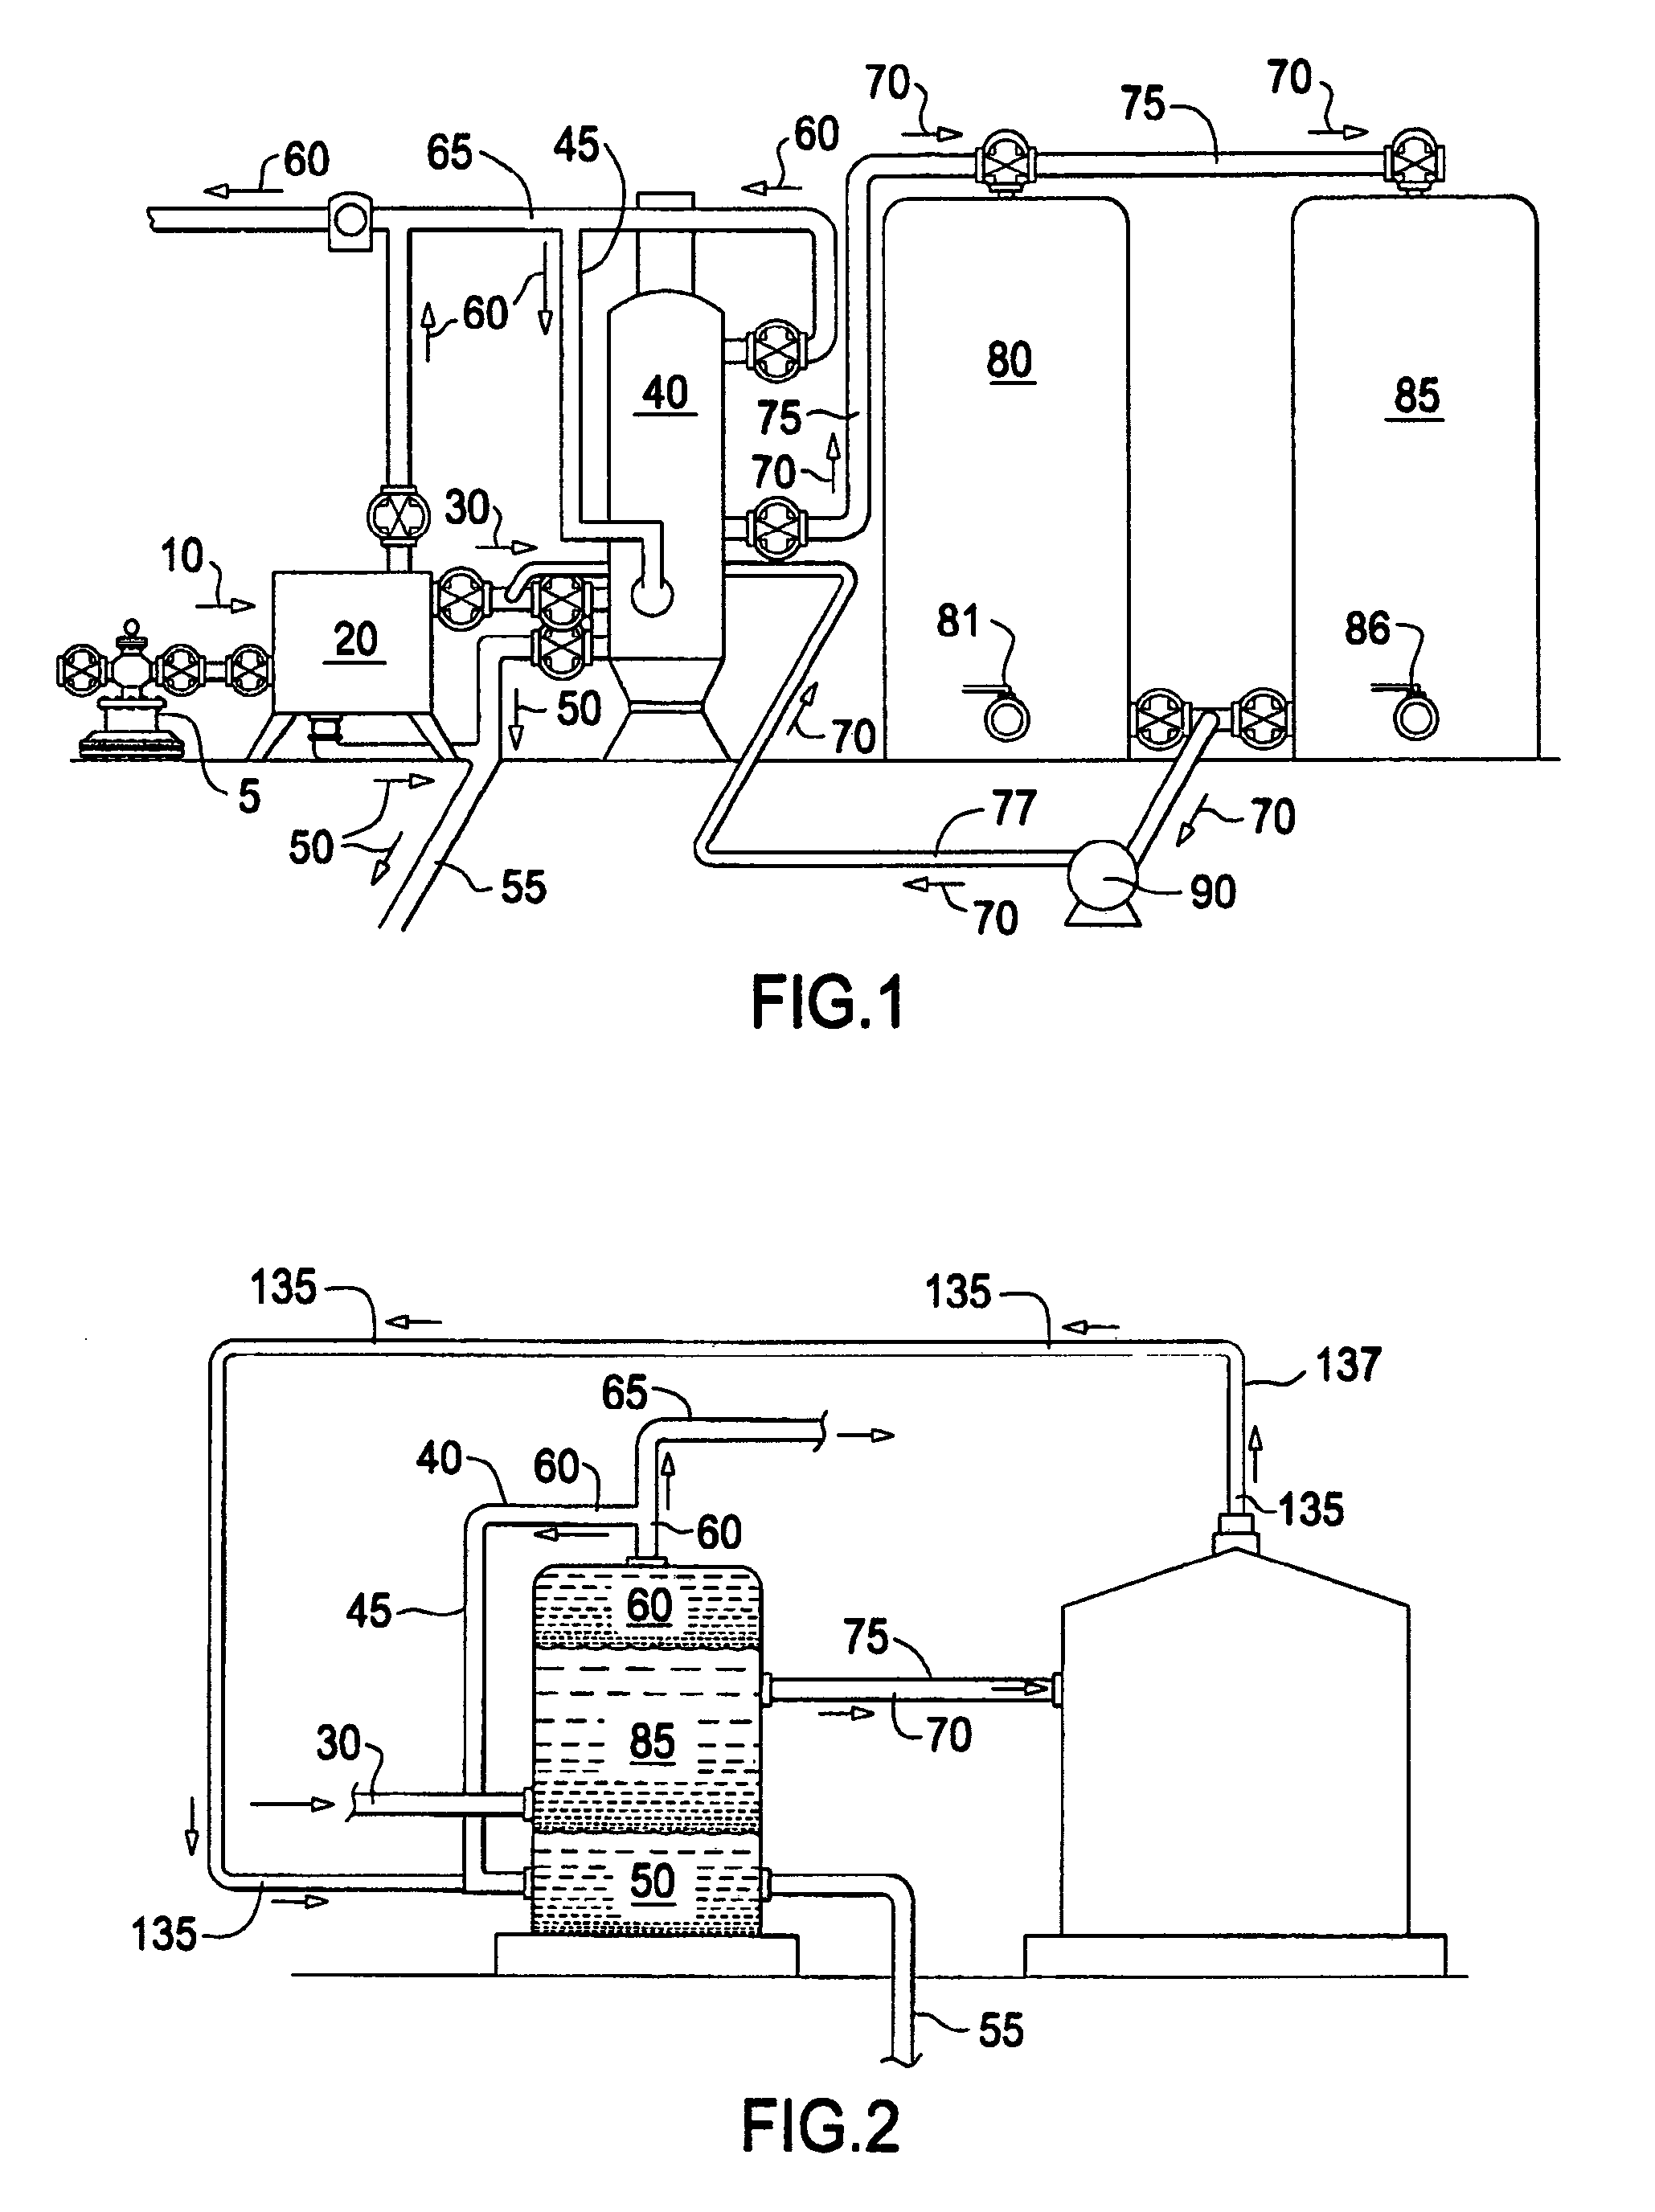 Method and apparatus to reduce a venting of raw natural gas emissions